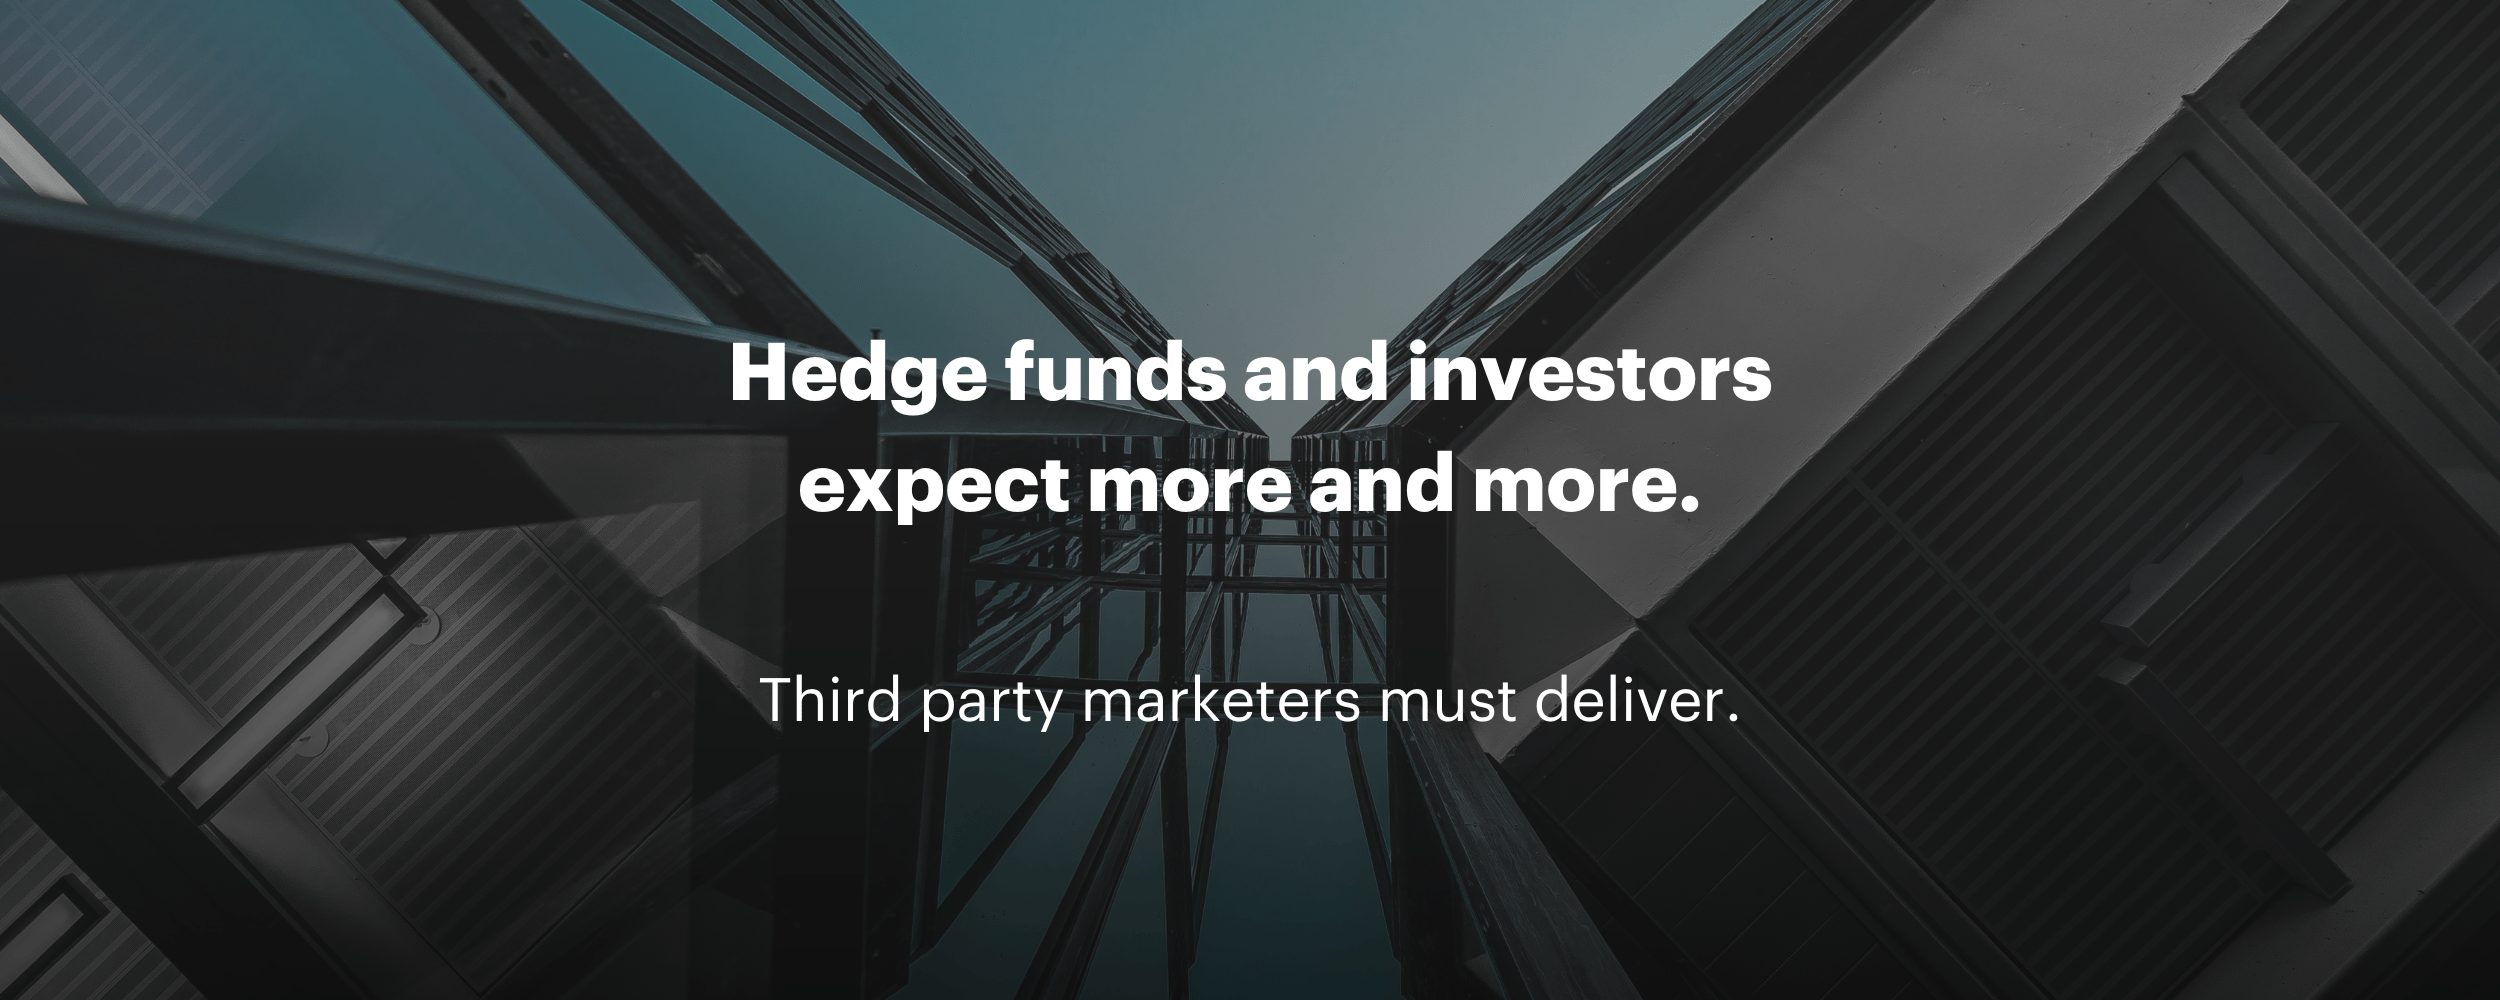 HEDGE FUNDS AND INVESTORS EXPECT MORE AND MORE (6)-min